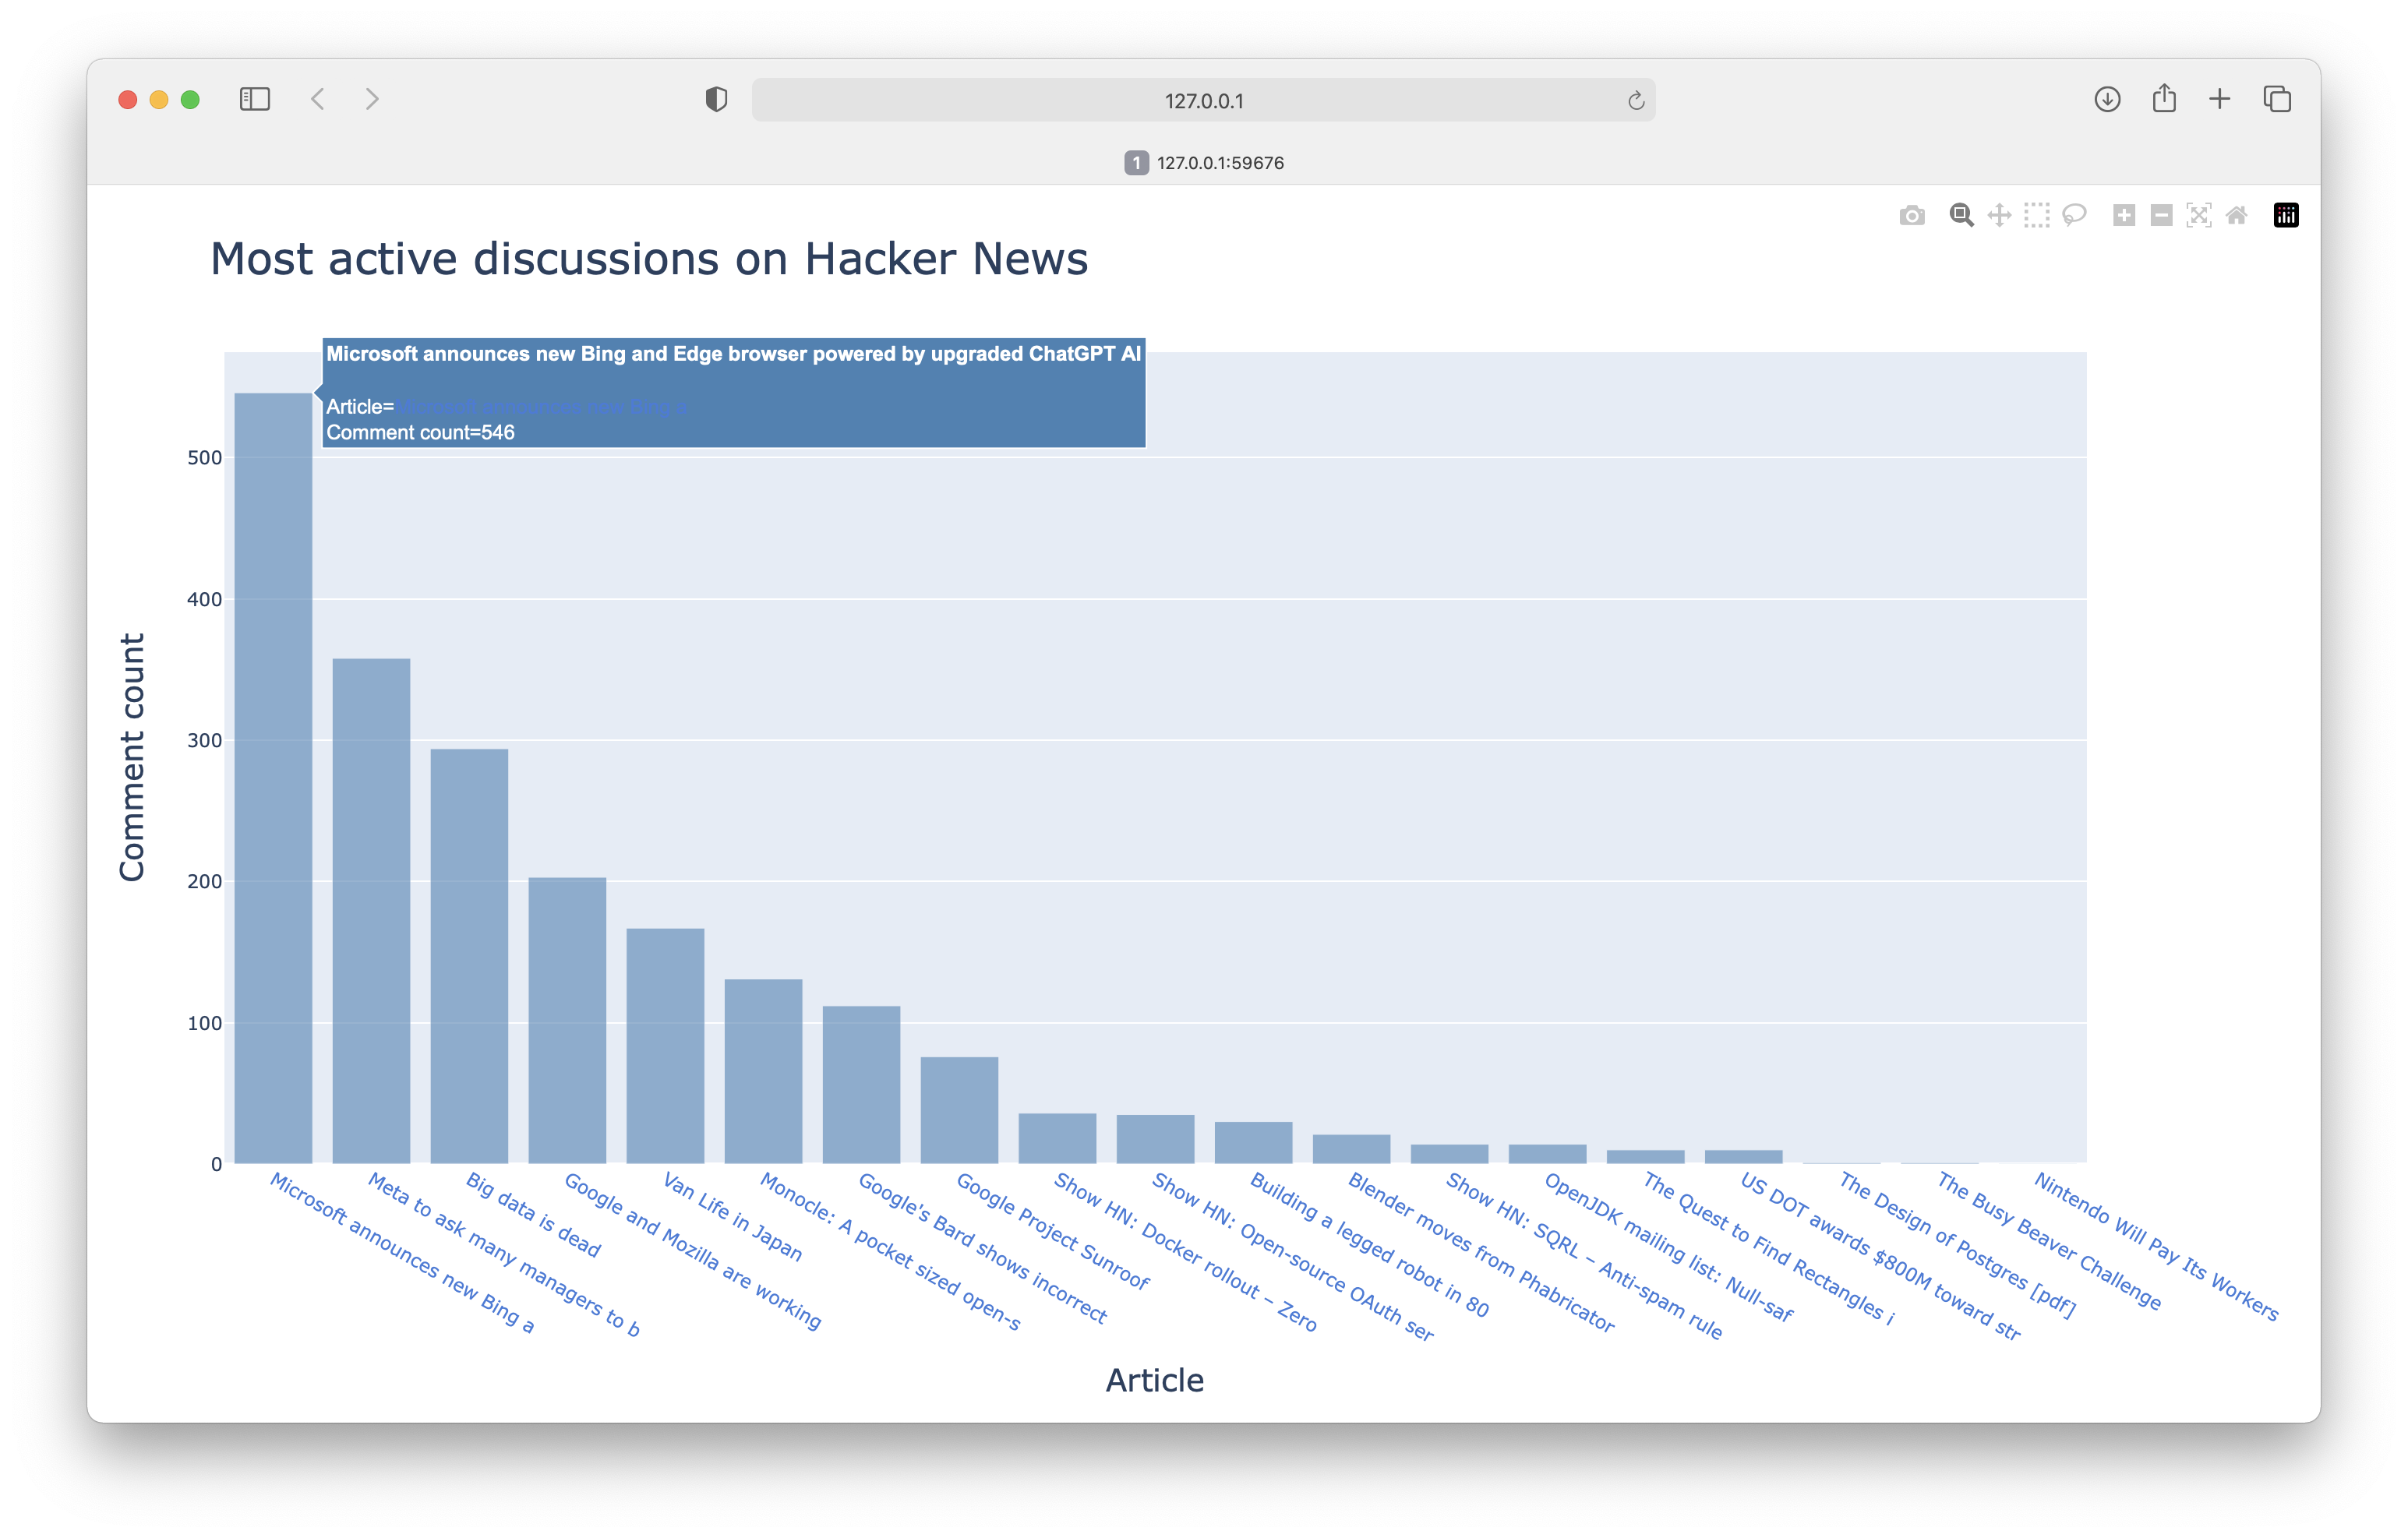 Chart showing the most active discussions on Hacker News.